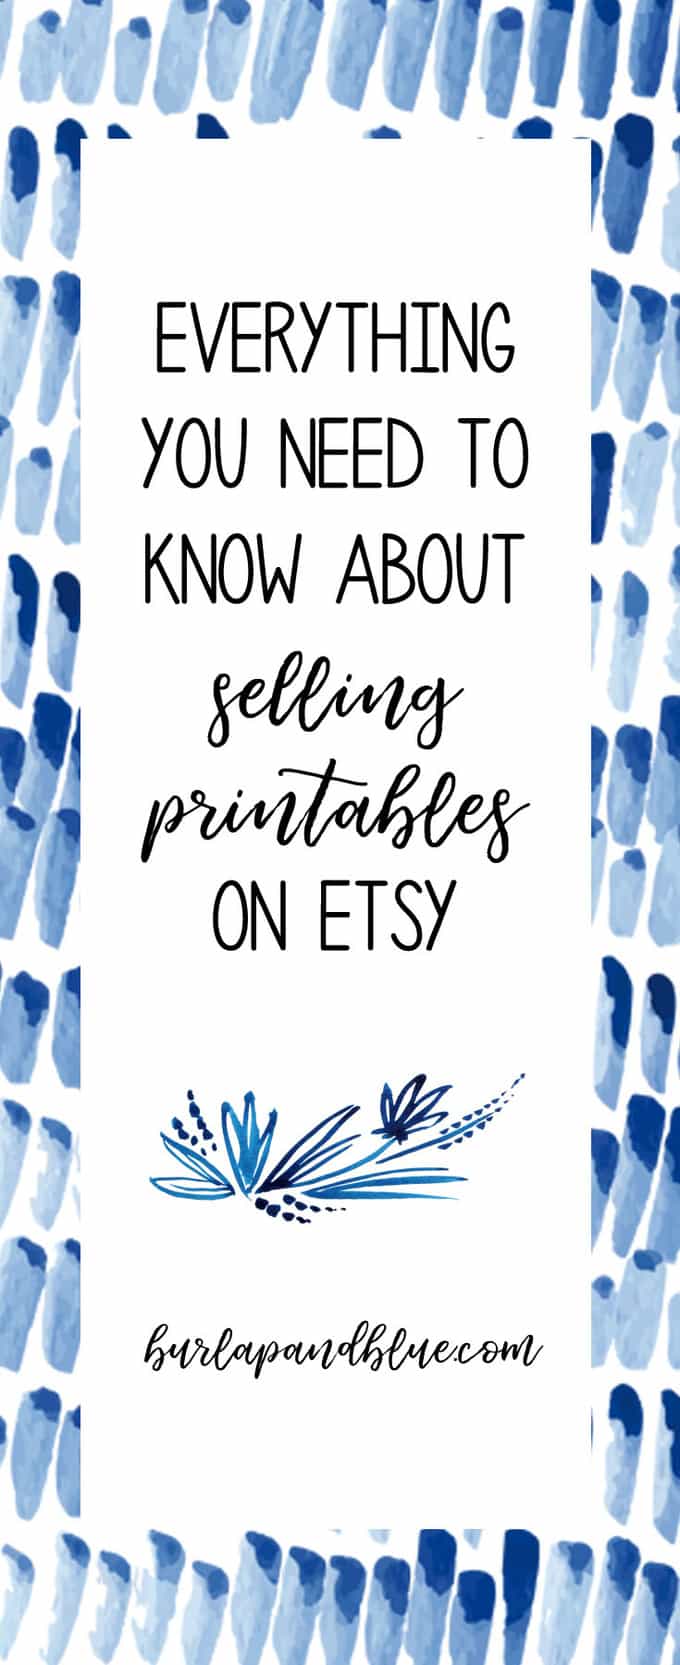 SELL ON ETSY {HOW TO SELL PRINTABLES ON ETSY}